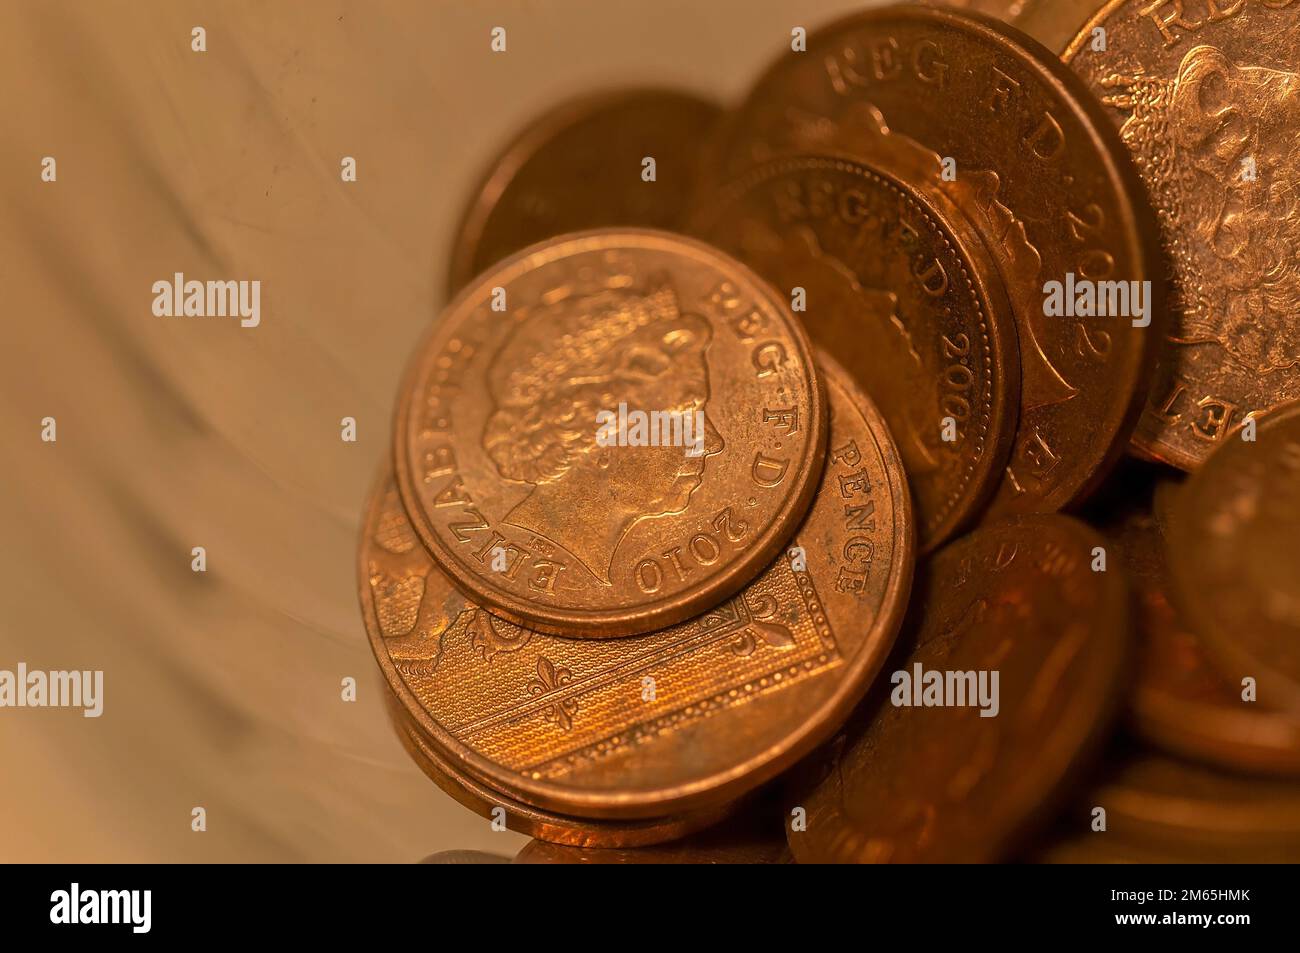 Spare change, British money. Currency of the United Kingdom containing the Queens image Stock Photo